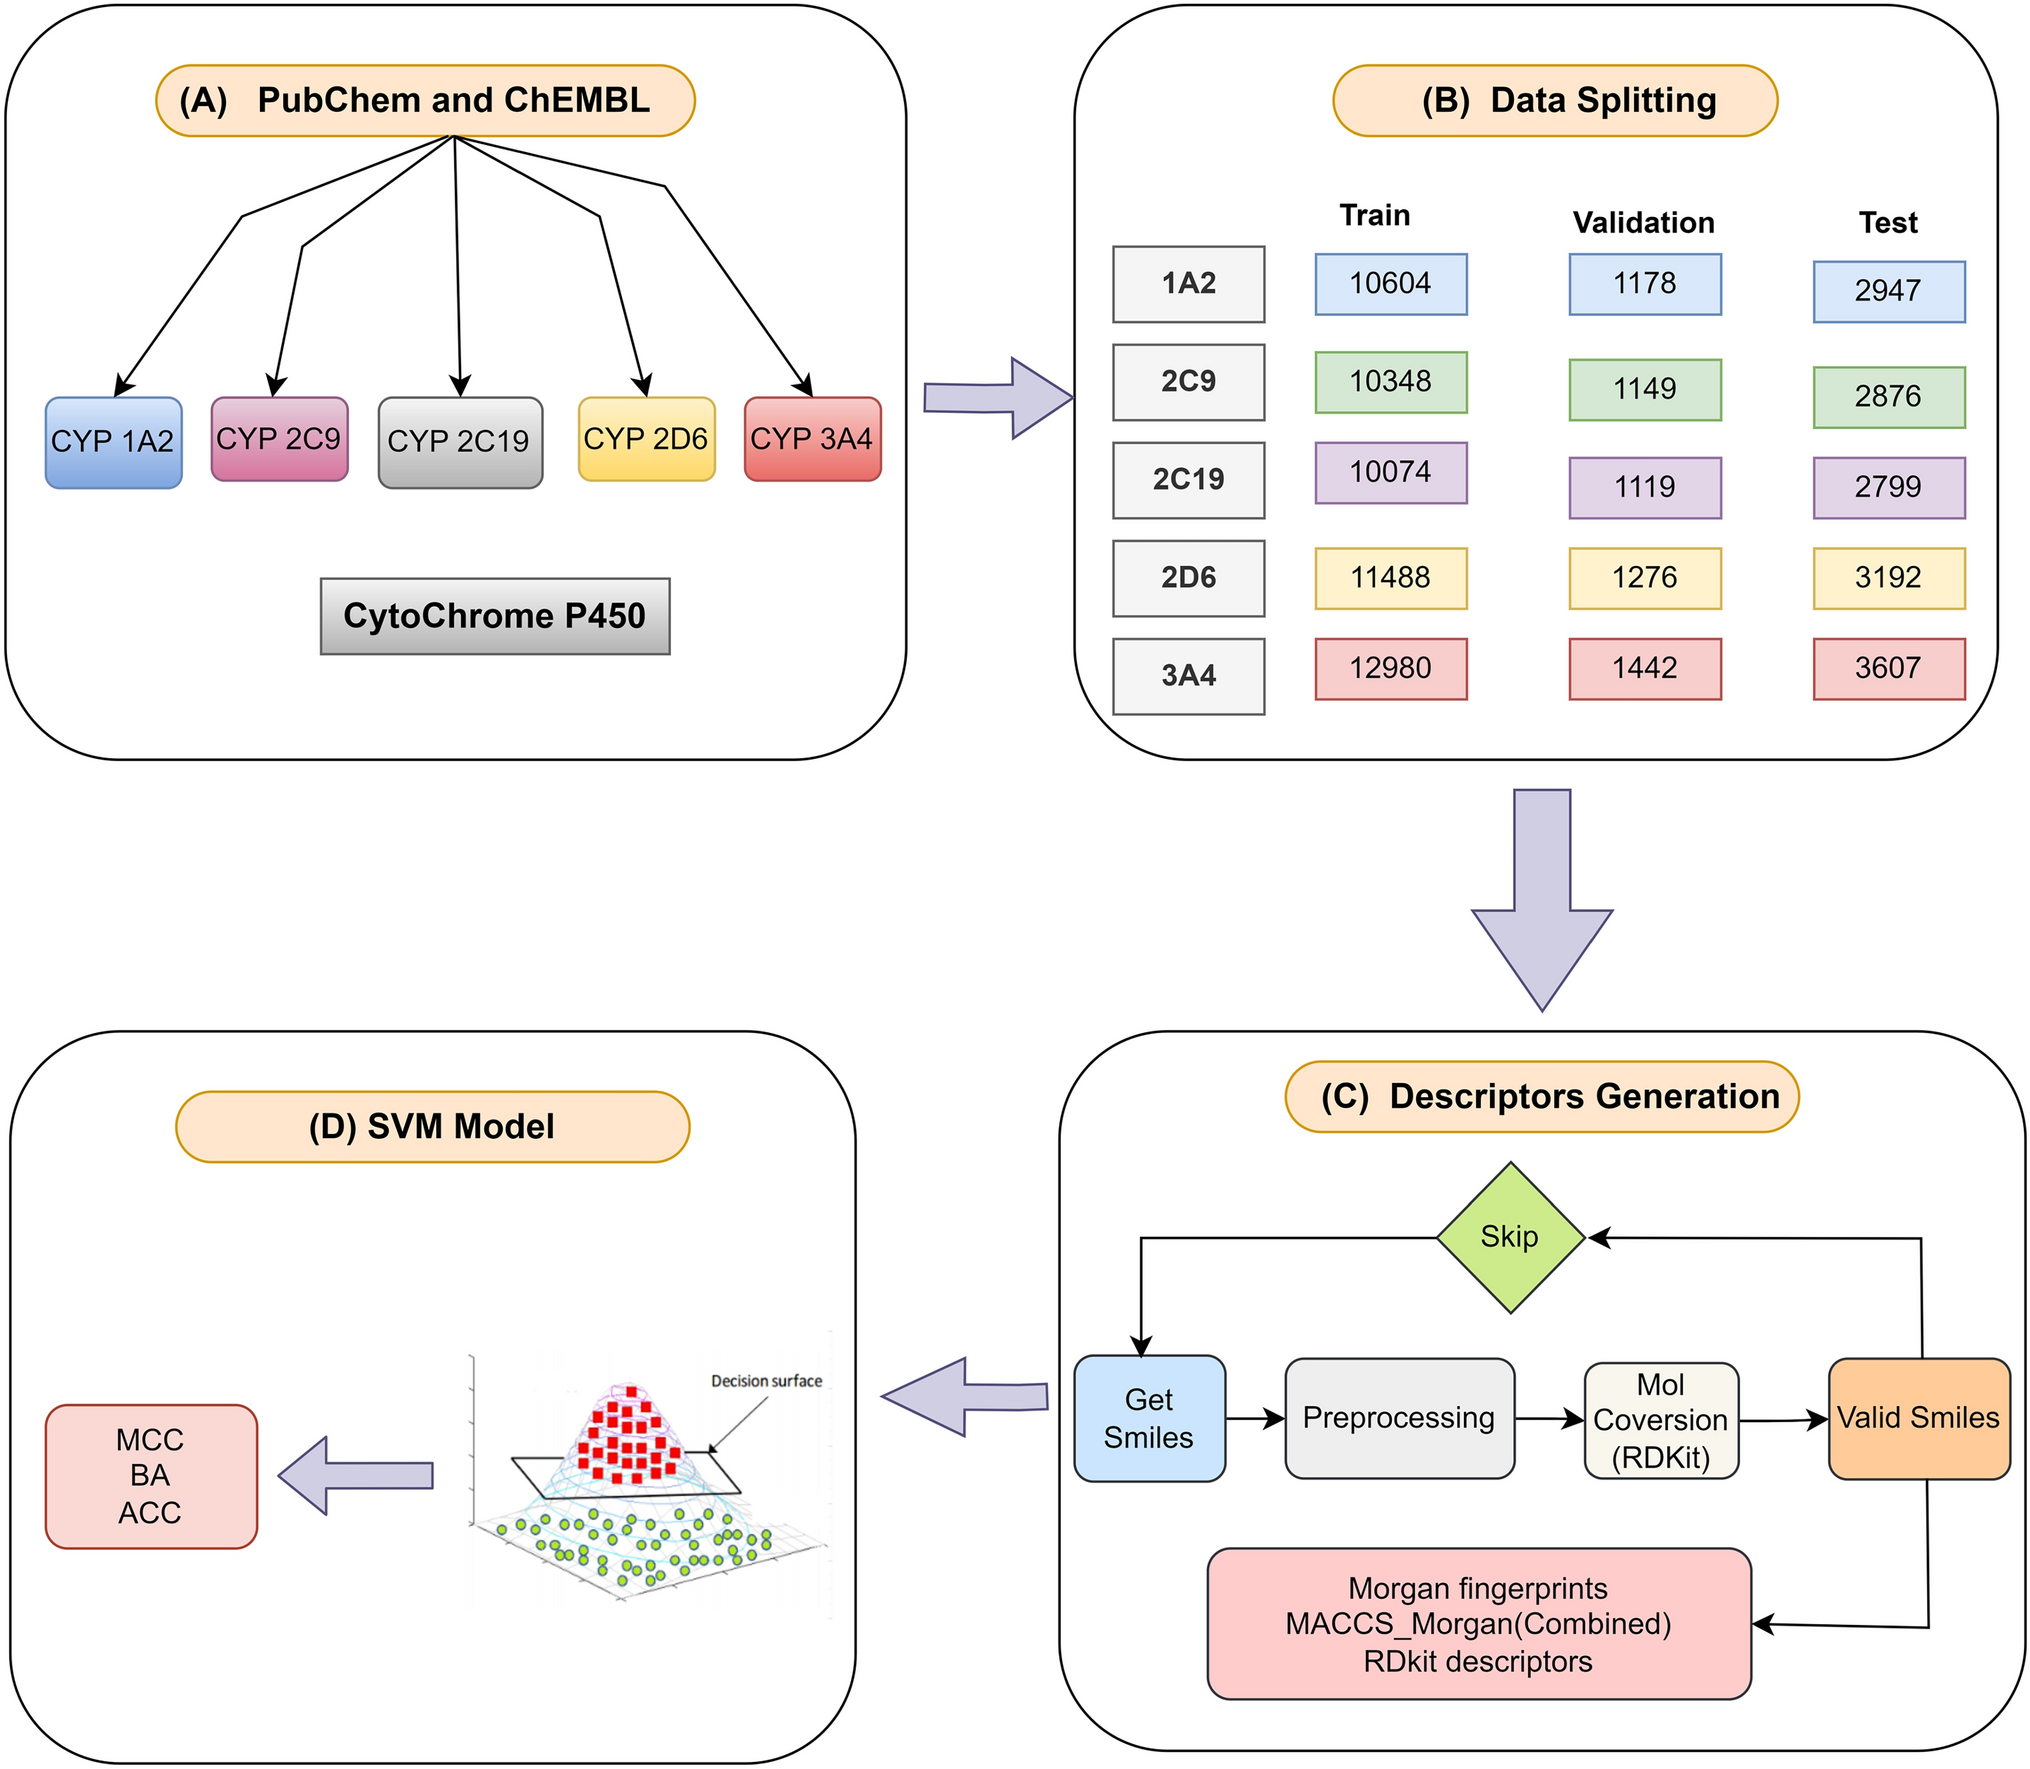 Harnessing machine learning to predict cytochrome P450 inhibition through molecular properties